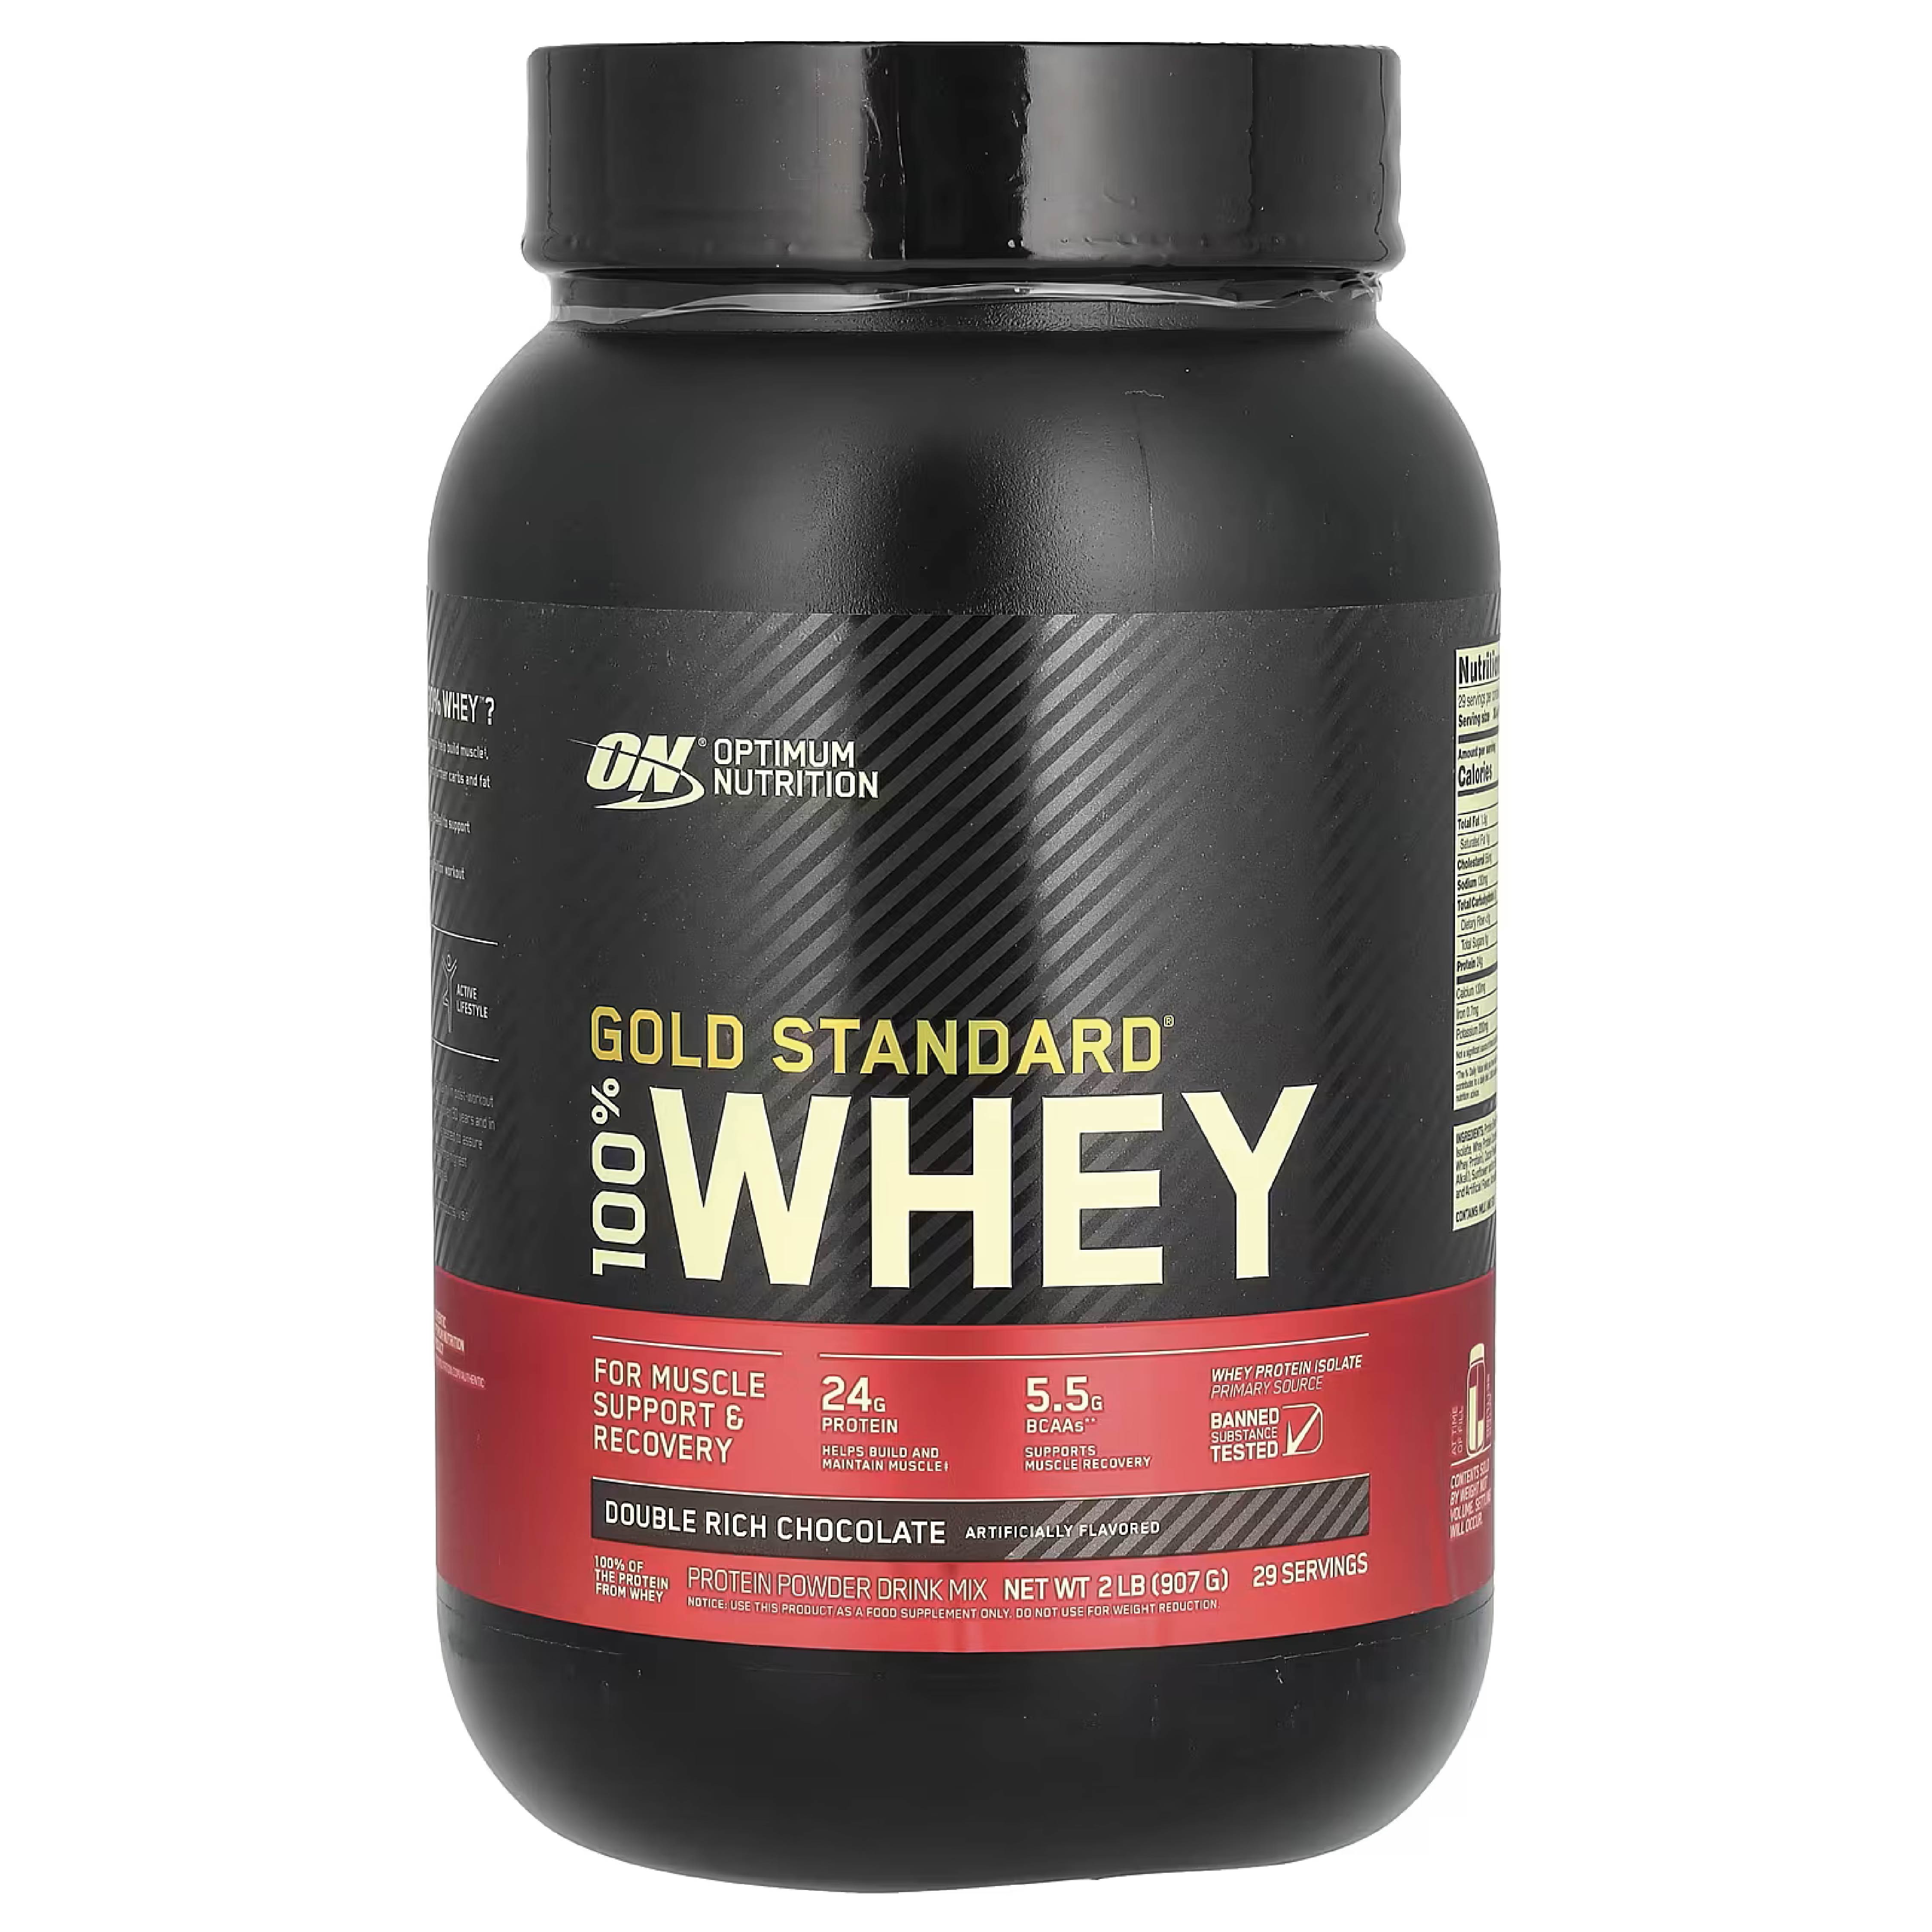 WHEY GOLD STANDARD 2 LIBRAS DOBLE RICH CHOCOLATE – OPTIMUM NUTRITION